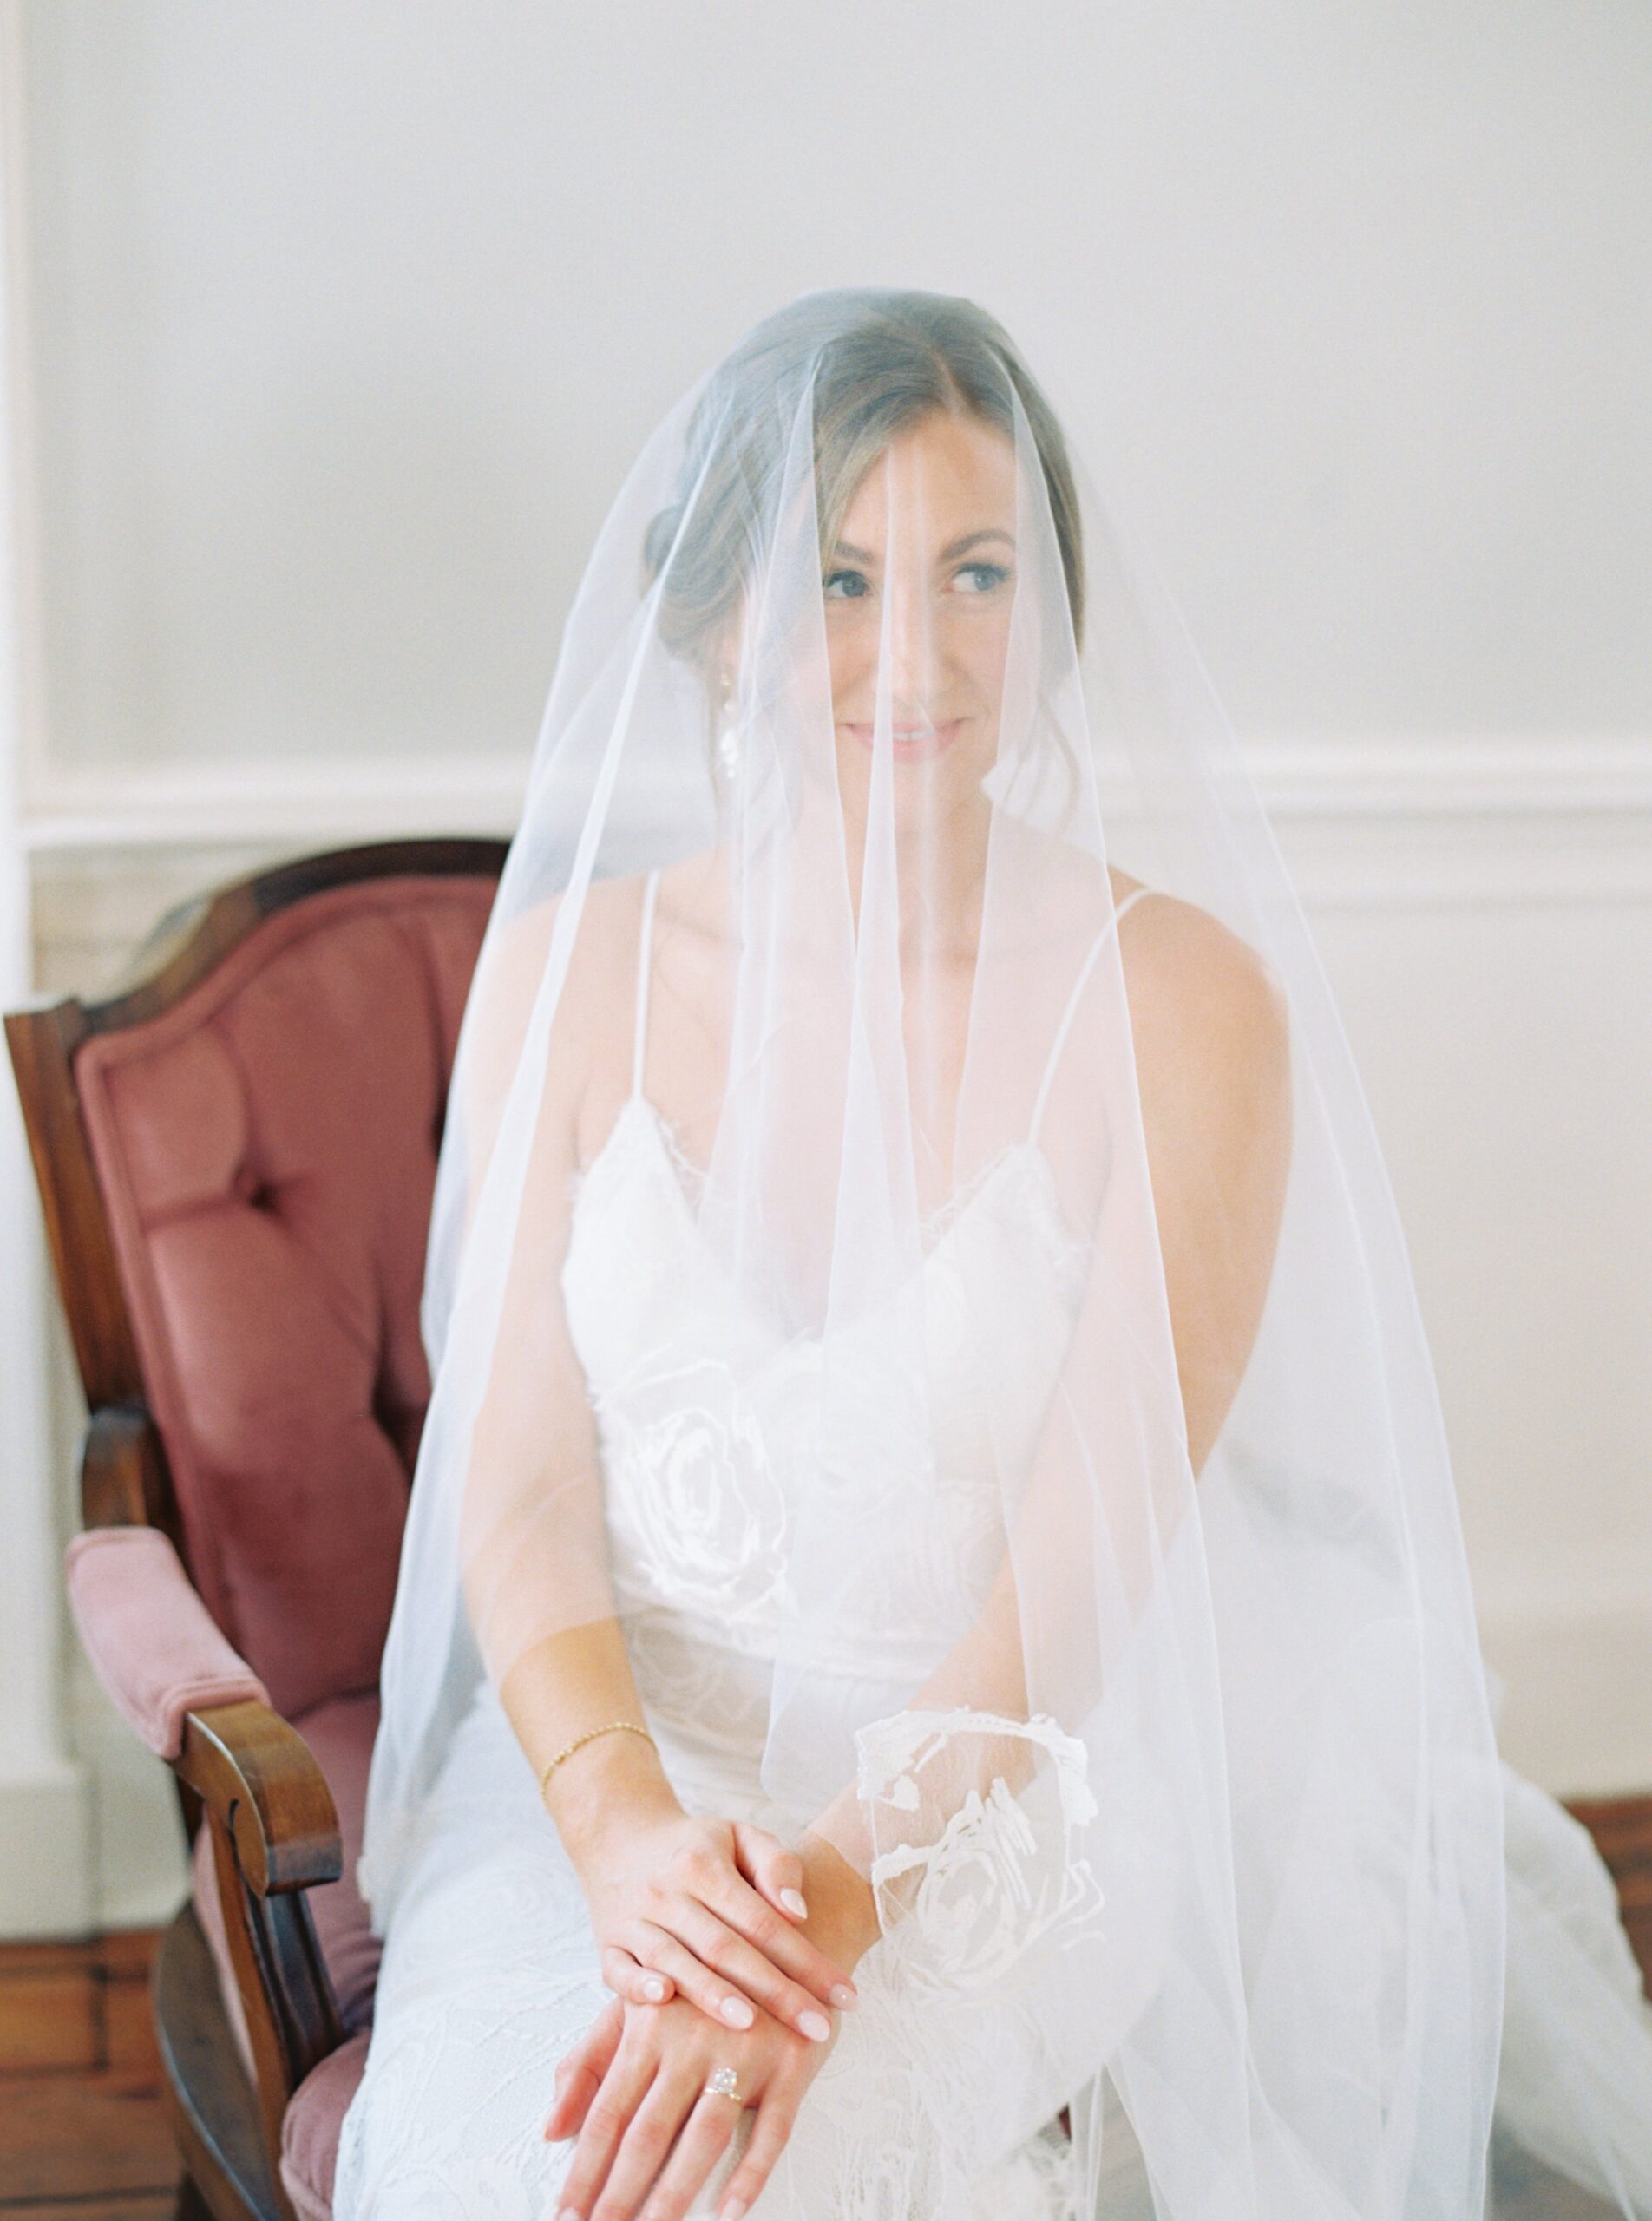 Quiet moment with bride in vintage chair, covered by veil.